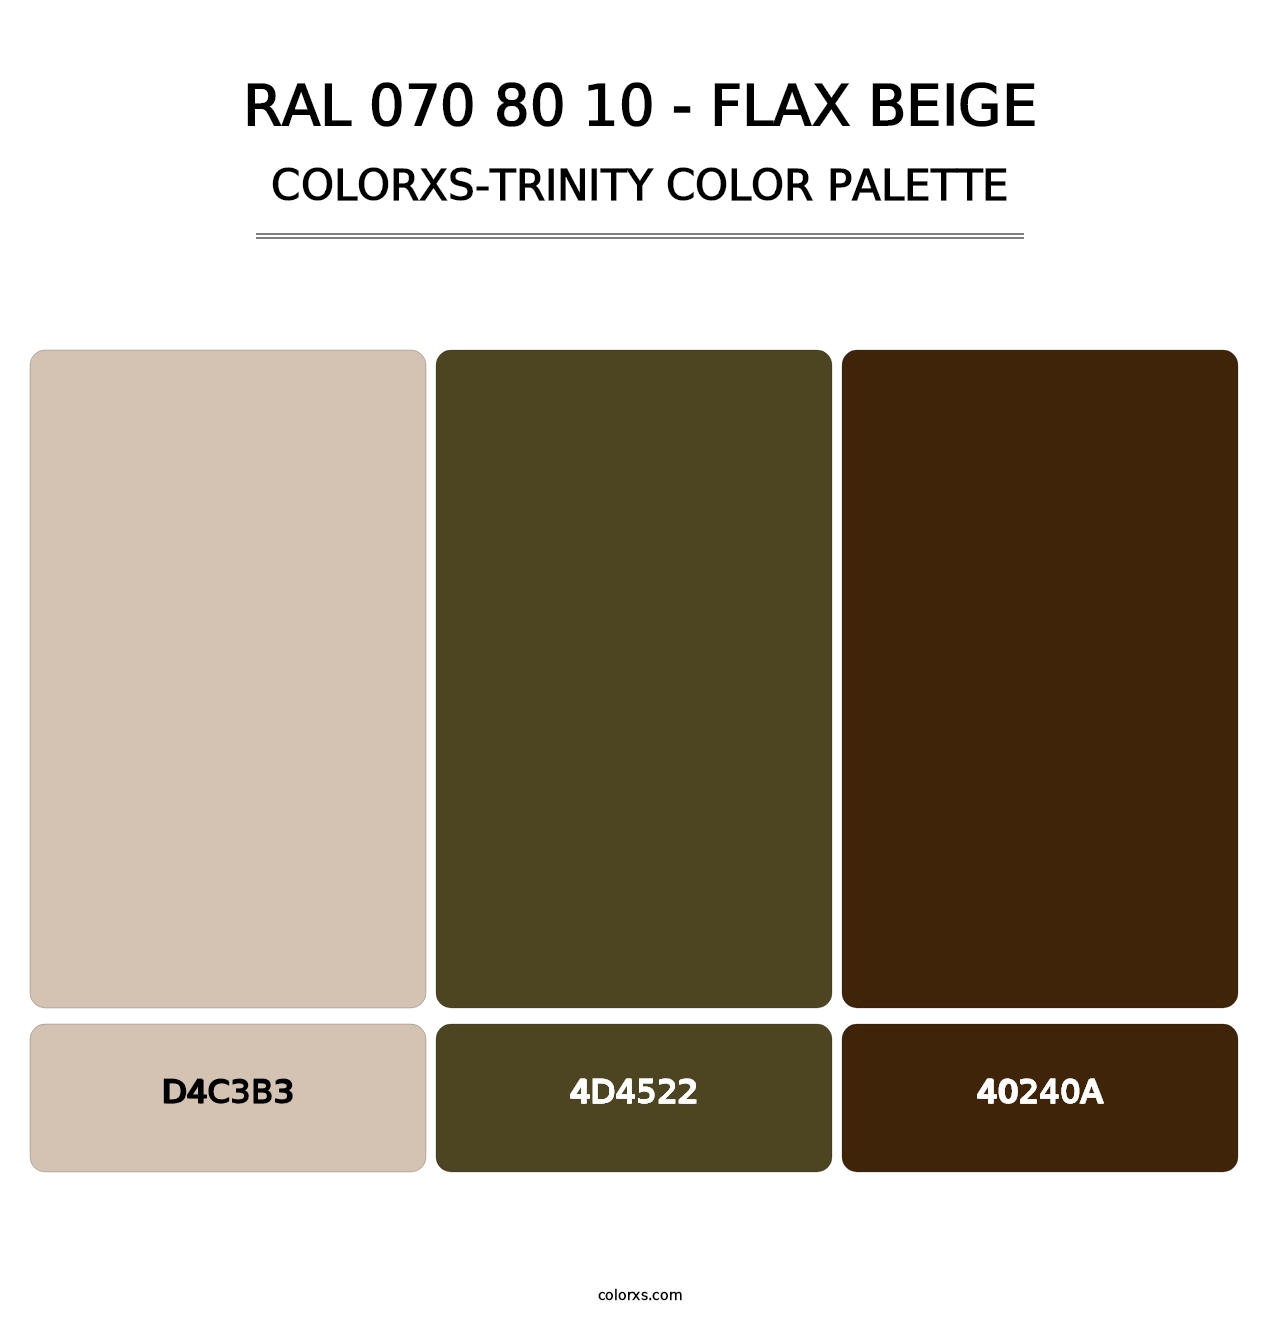 RAL 070 80 10 - Flax Beige - Colorxs Trinity Palette